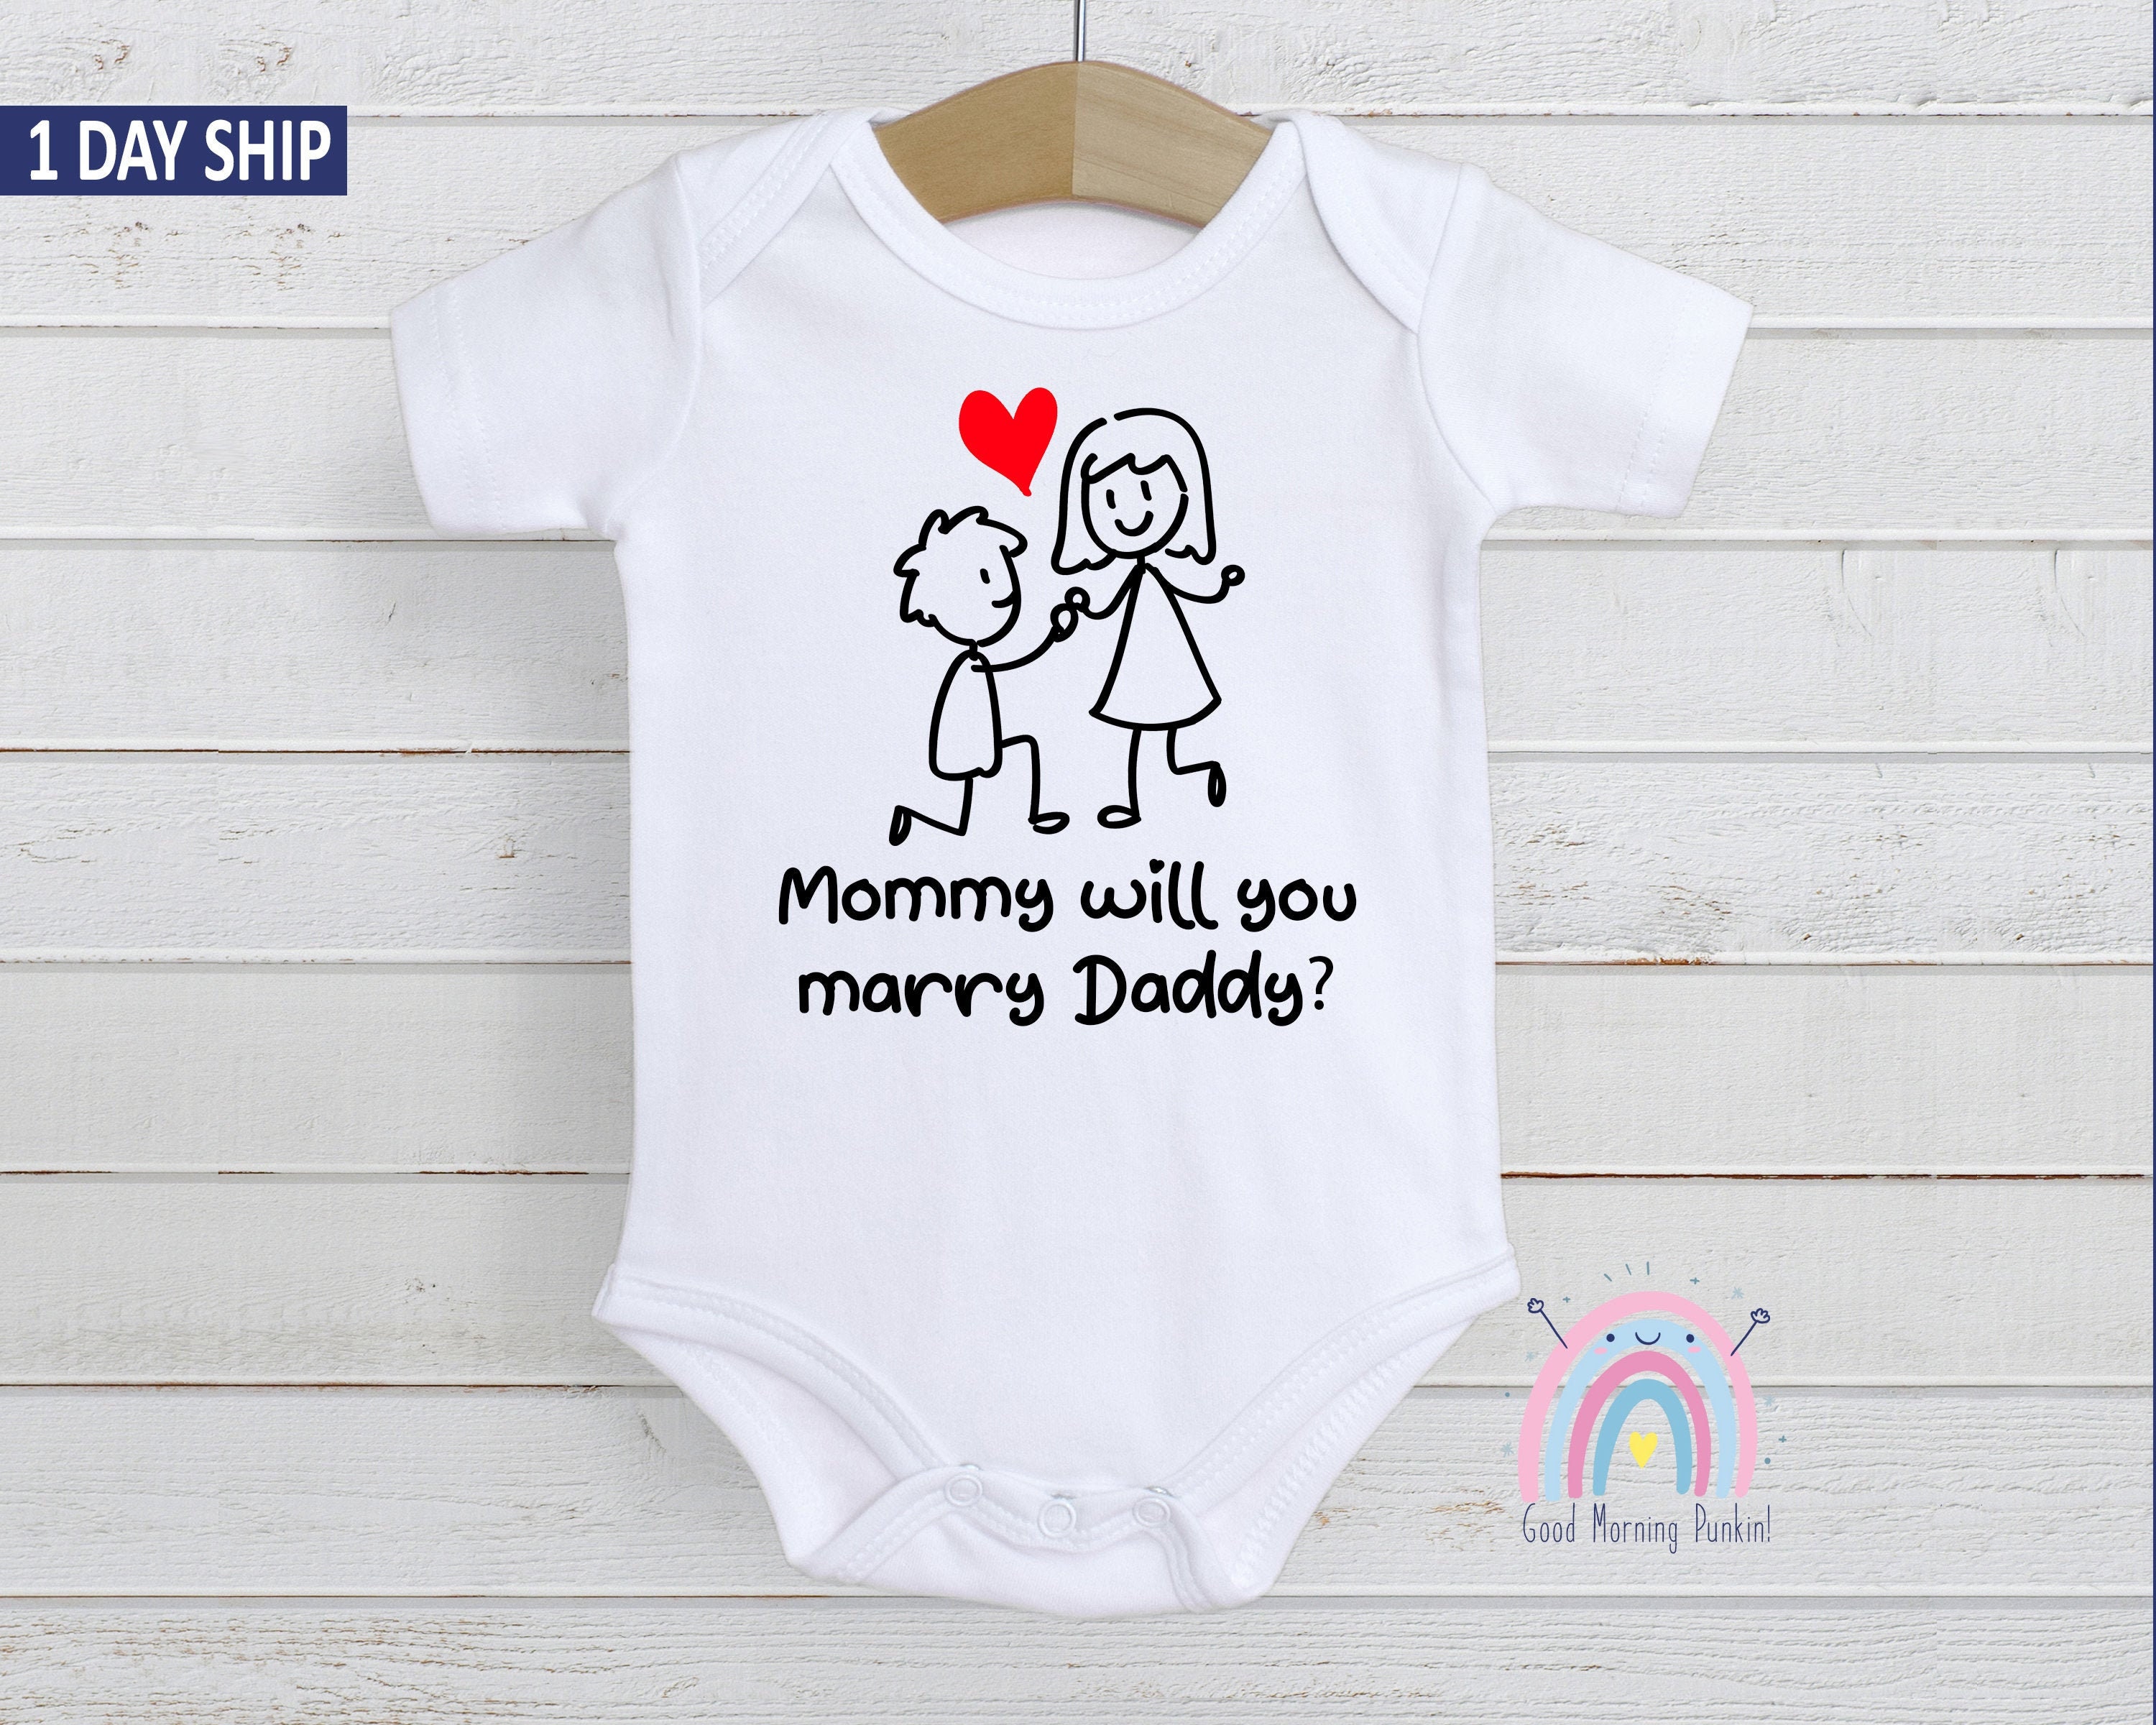 BABY BOY OR GIRL ENGAGEMENT GIFT ROMPER Rose Gold Mummy will you marry Daddy? 